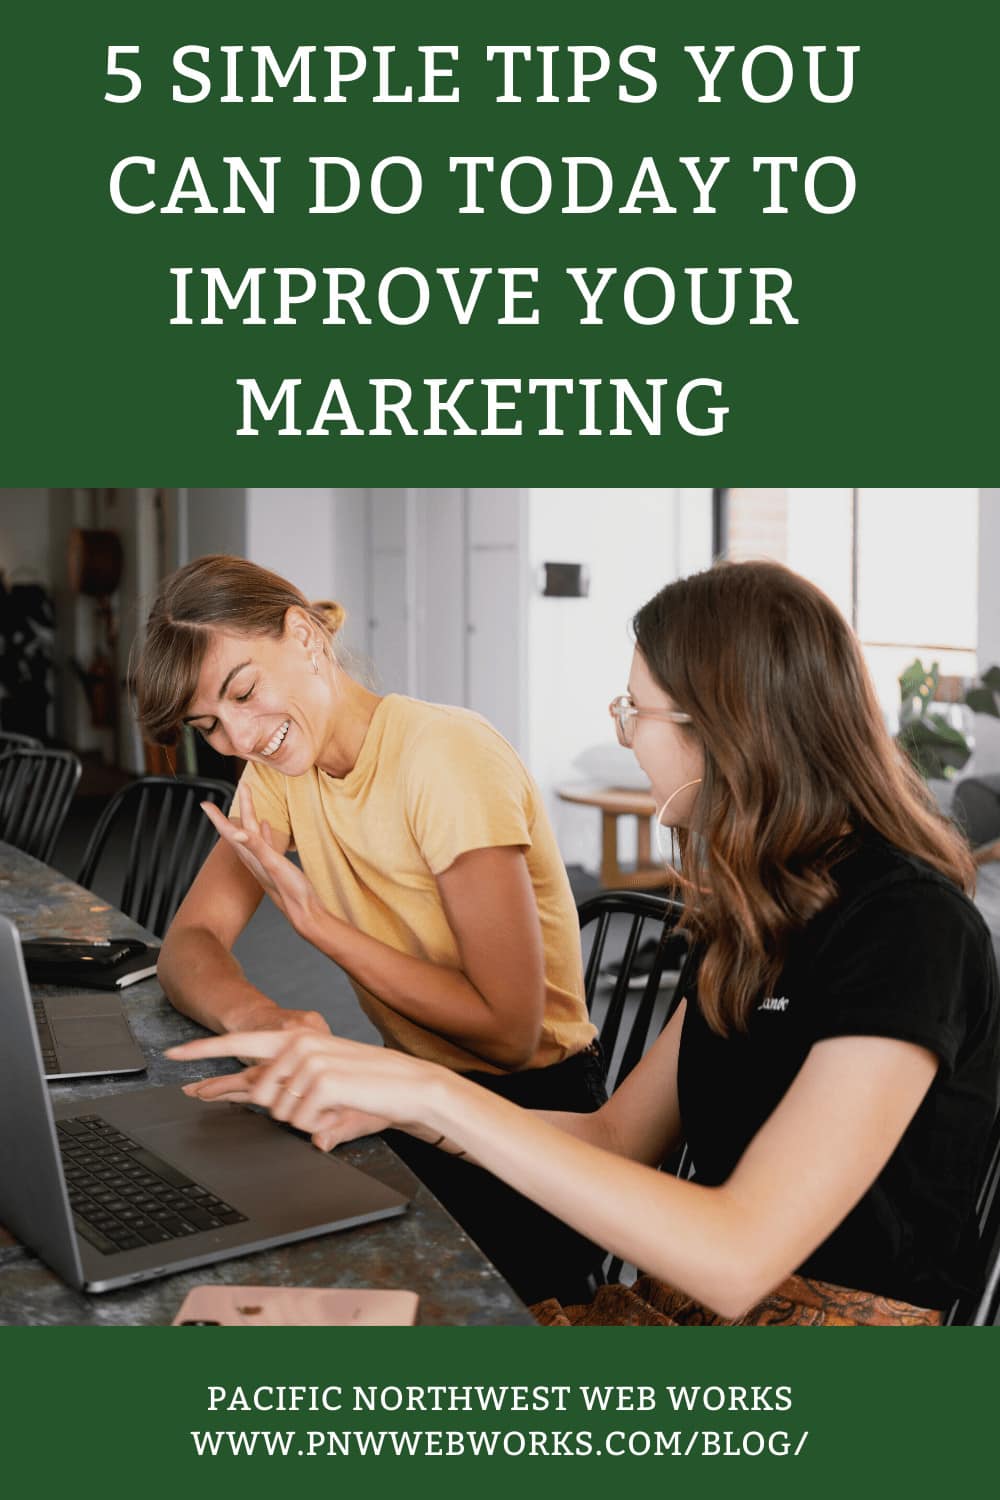 5 simple tips you can do today to improve your marketing